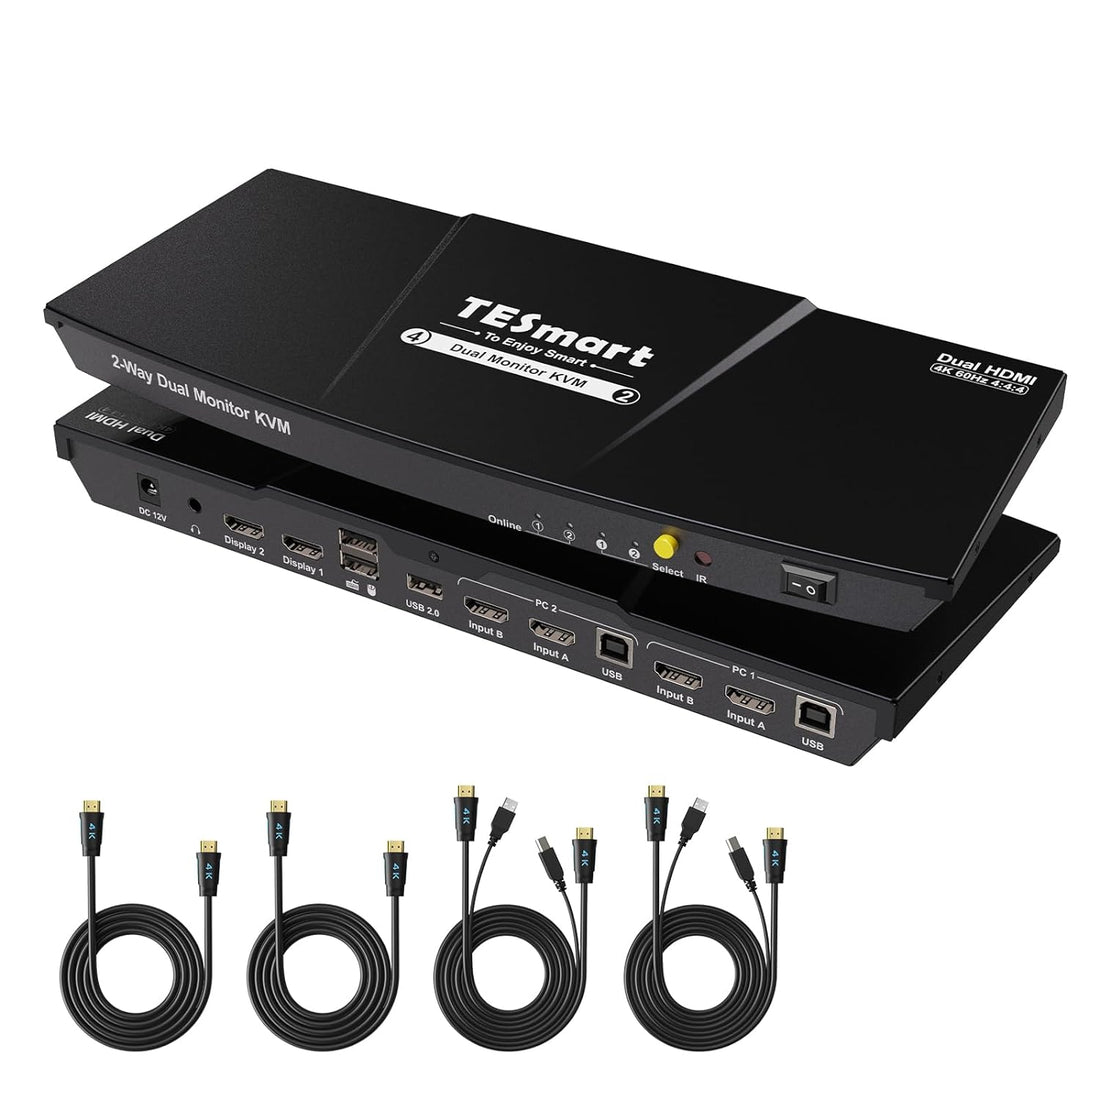 TESmart Dual HDMI 4x2 Dual Monitor KVM Switch 2 Ports Updated 4K@60Hz, Support HDR 10, HDCP 2.2 (Black)